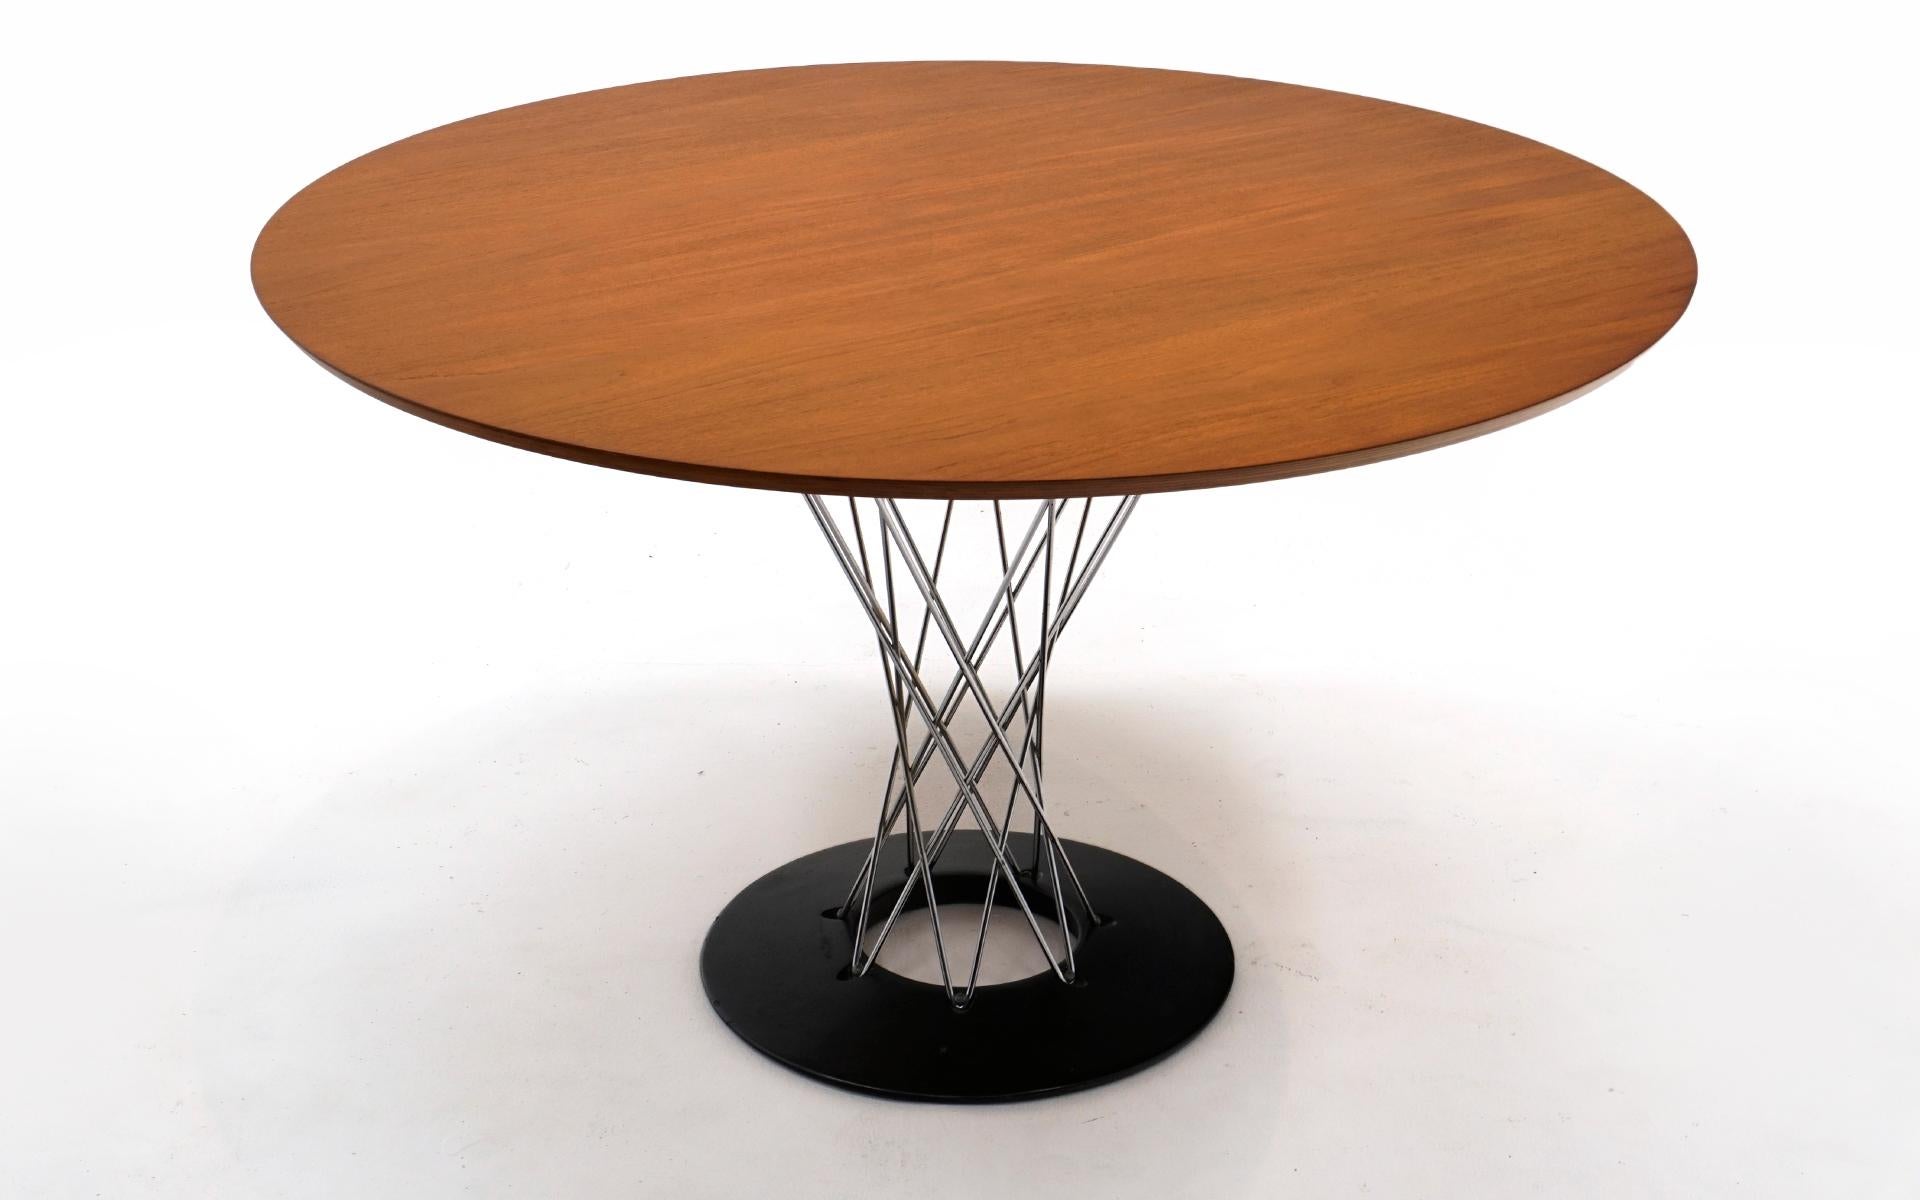 Early and rare Noguchi Cyclone table. Out of production 48 inch round Teak top which has been expertly refinished. The chrome is free of pitting. The heavy iron base shows scuffs and light scratches from use. This is a fine example of this out of